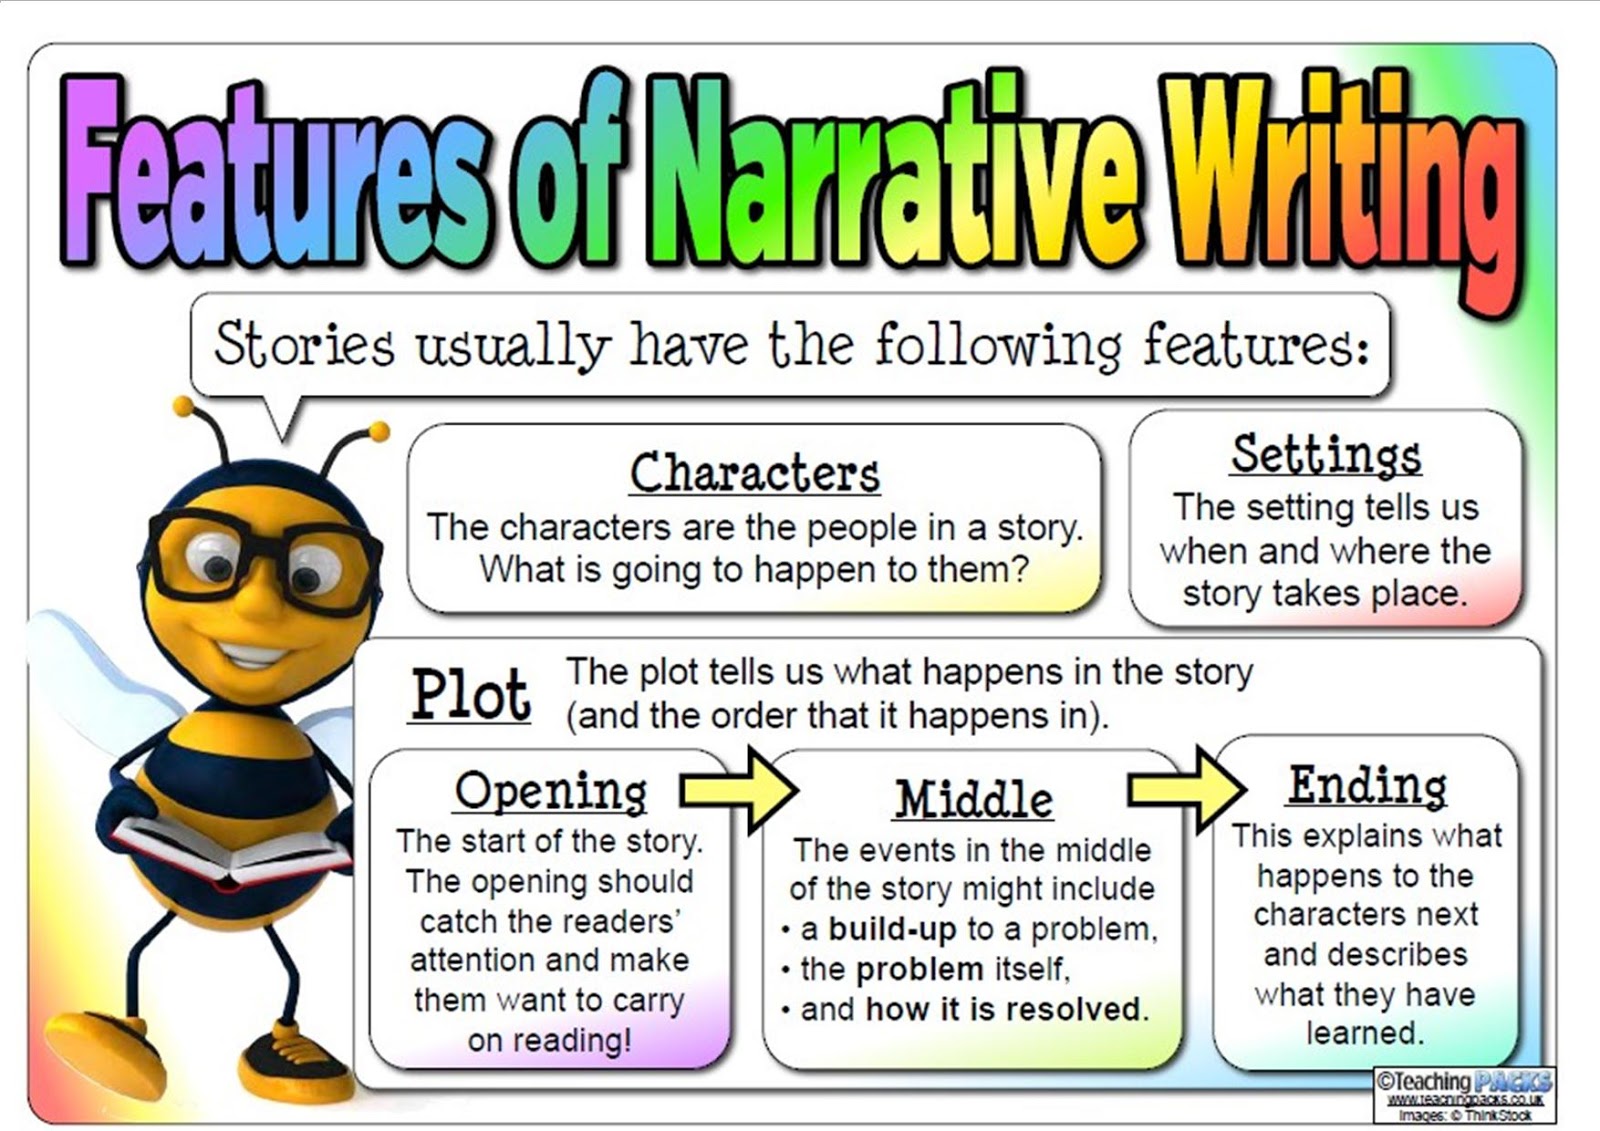 Character features. Character and Plot. Character stories. Features of character. Writing stories.